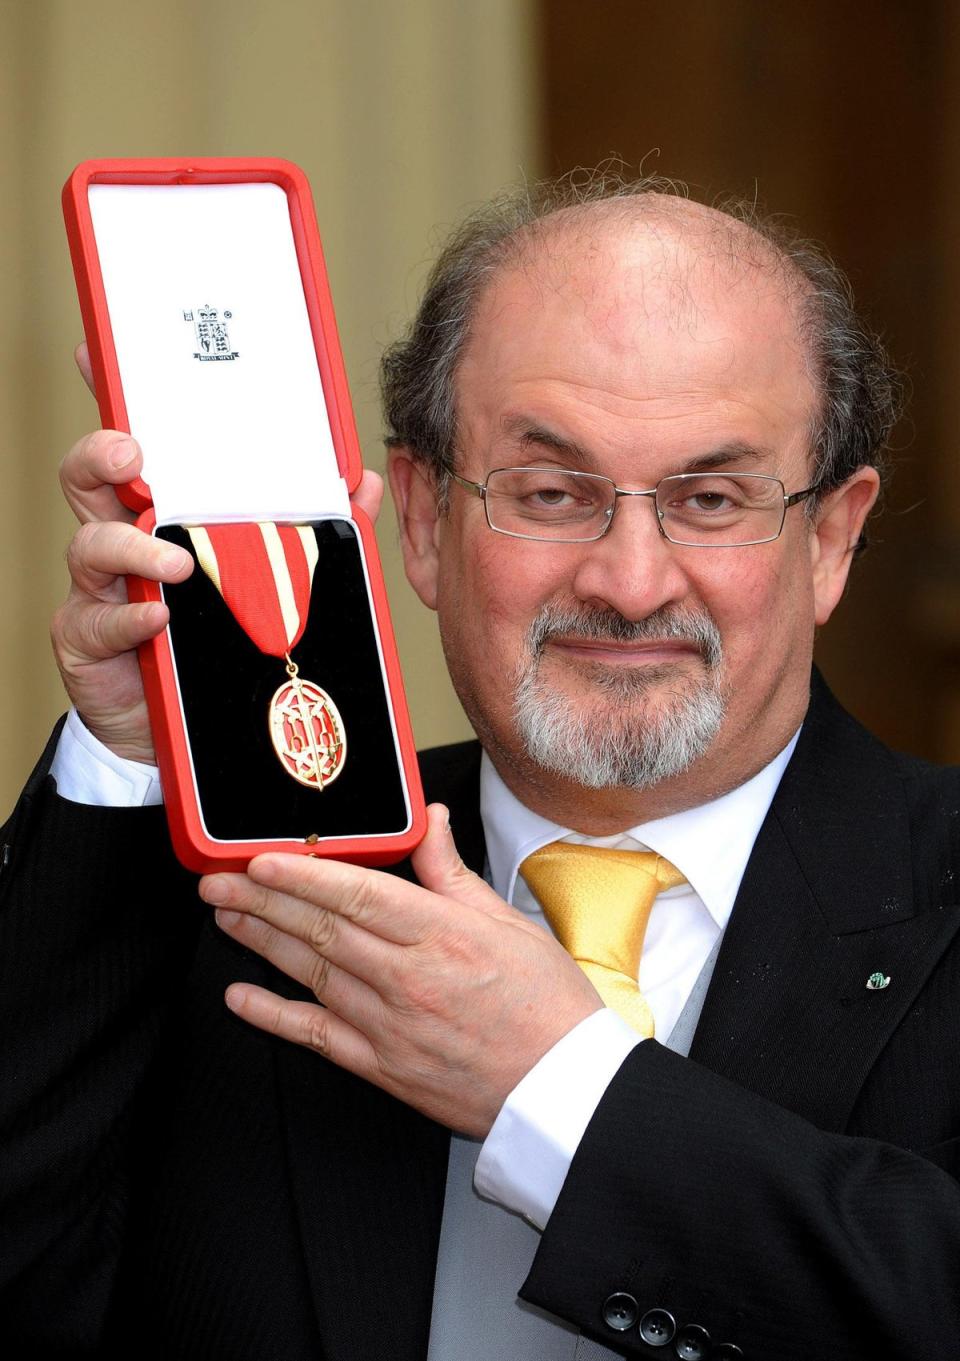 Sir Salman Rushdie after receiving his knighthood from the Queen in 2008 (John Stillwell/PA) (PA Archive)